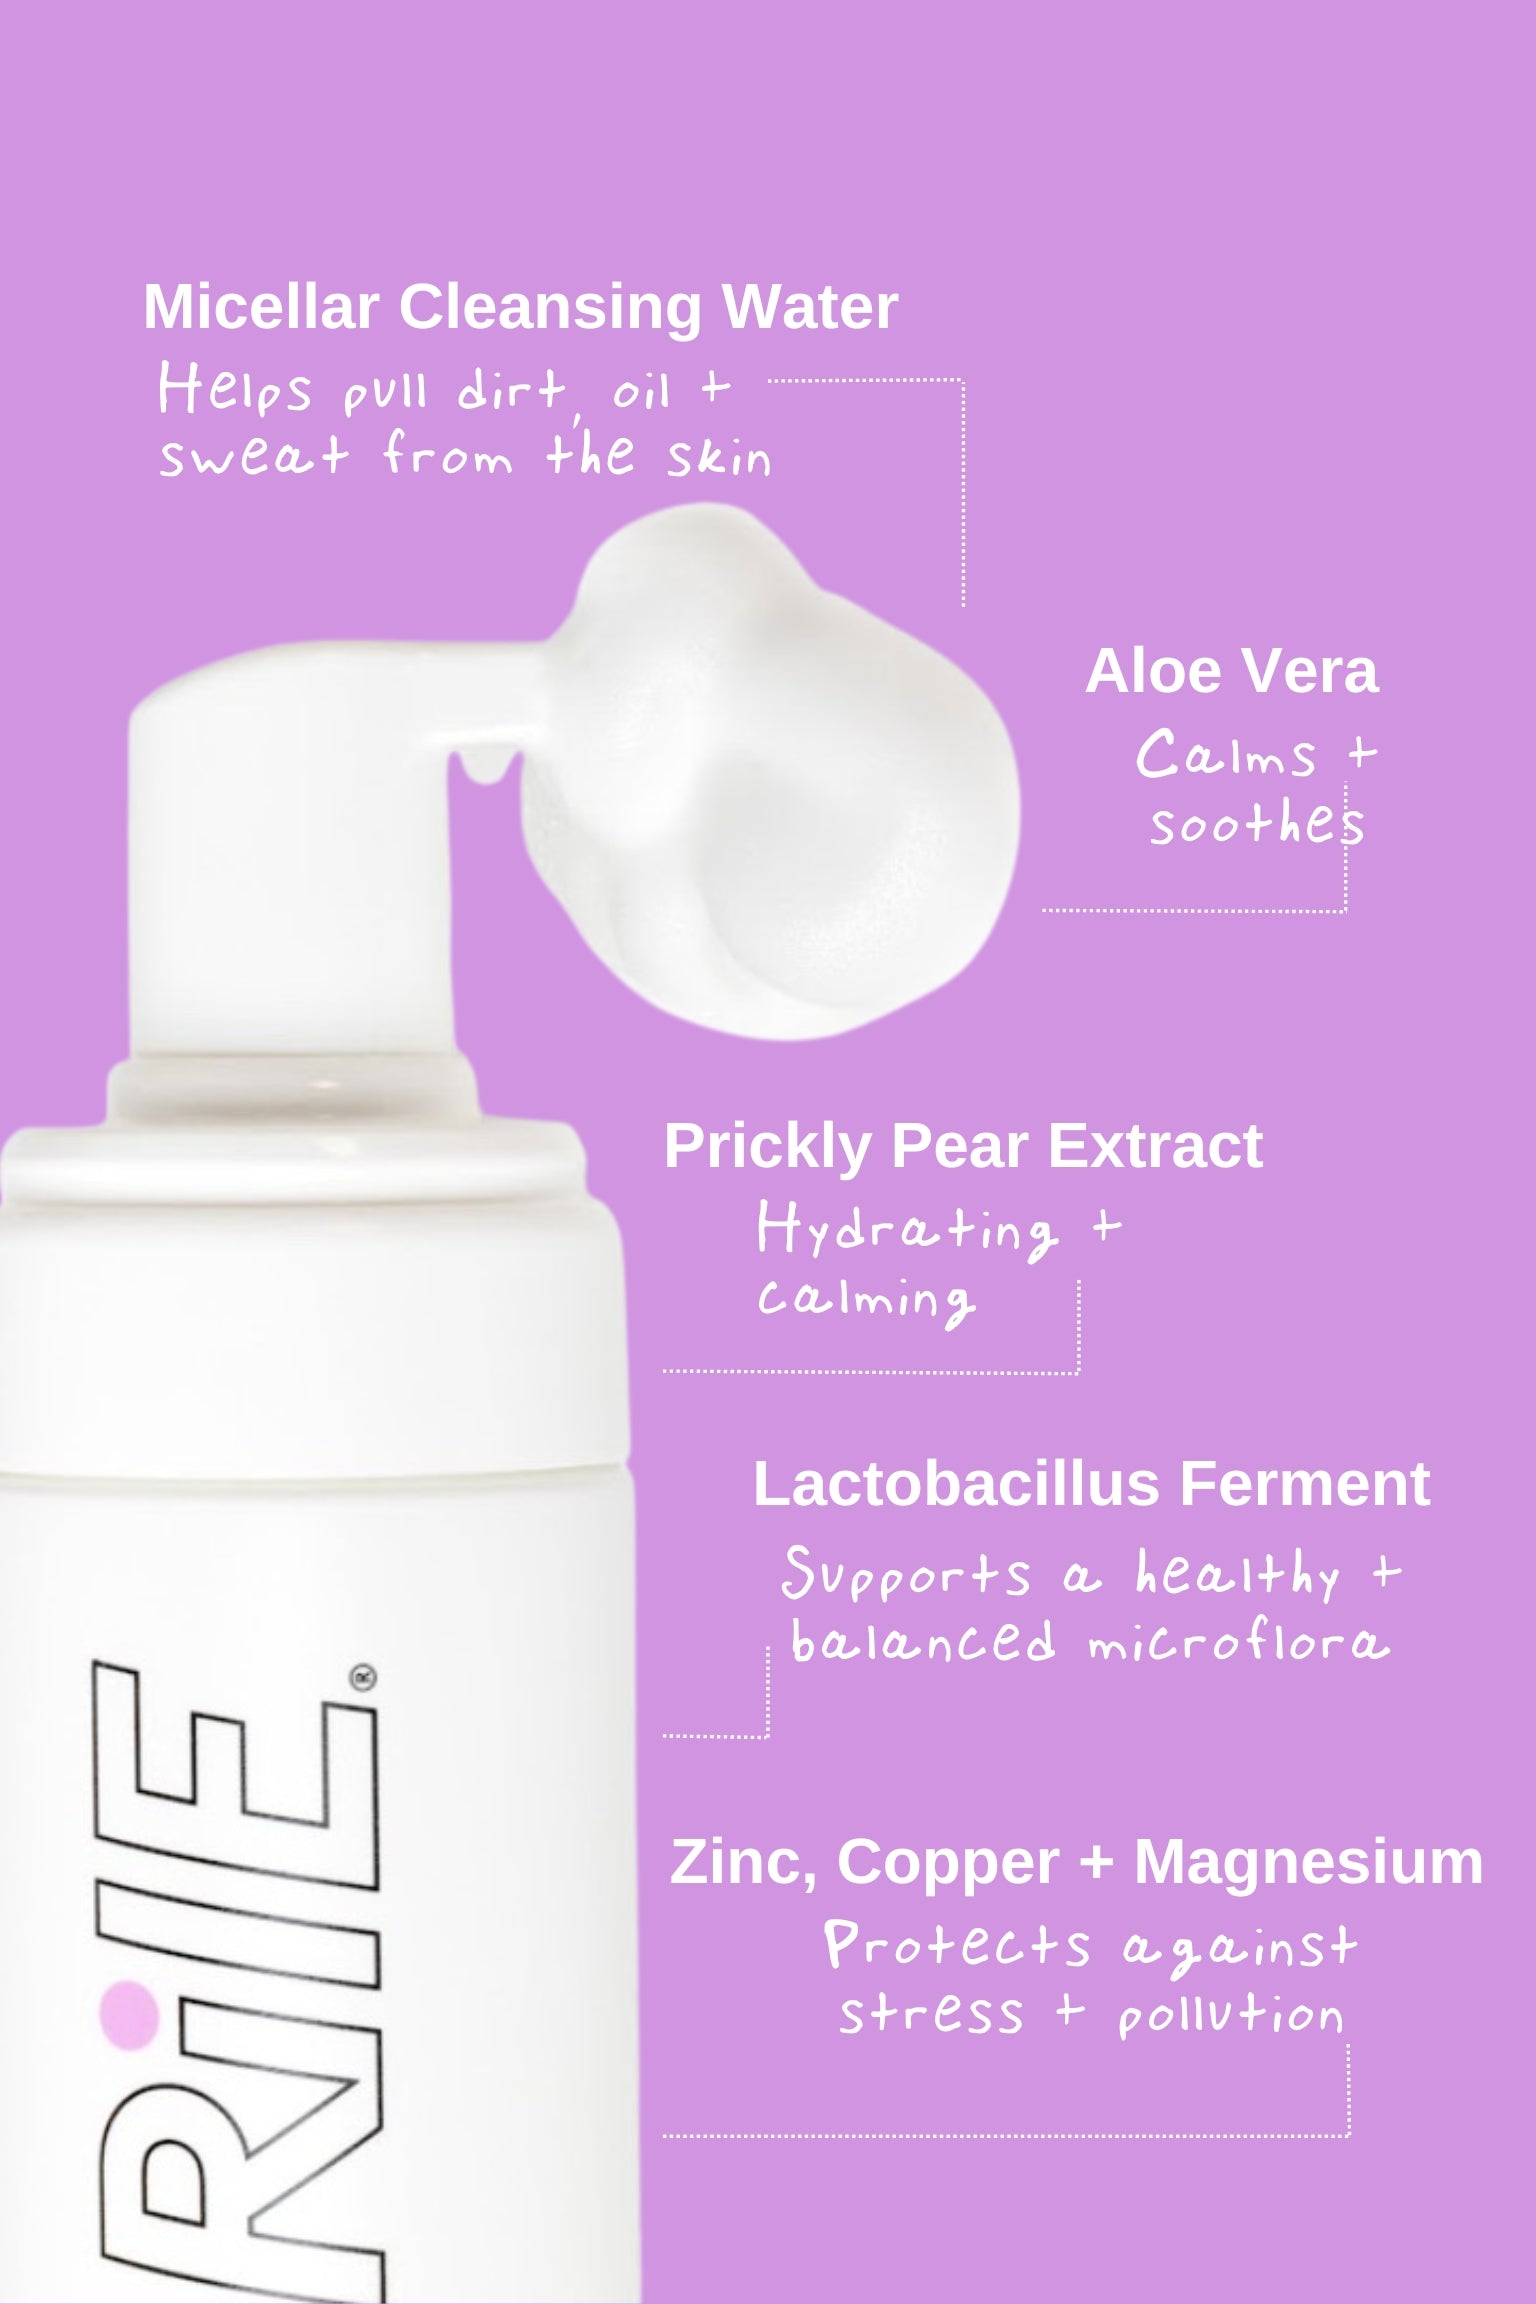 The white No Shower Shower bottle showing some of the face and body foam. The ingredients Micellar Cleansing water, Aloe Vera, Prickly Pear extract, Lactobacillus ferment, Zinc, Copper and magnesium are highlighted and how they calm, soothe and protect the skin.